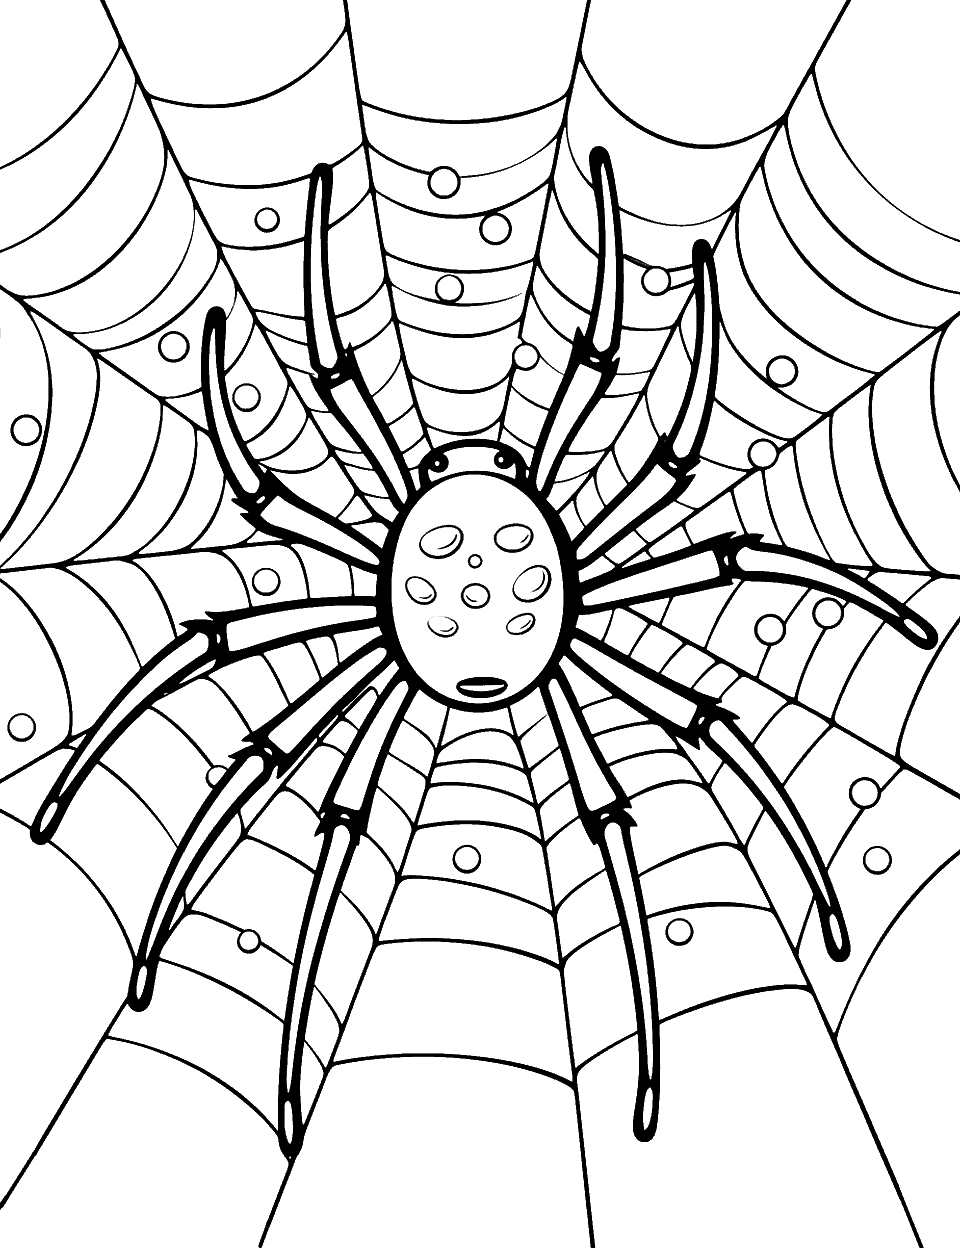 Spider Web in the Morning Dew Coloring Page - A delicate spider web covered in morning dew drops.